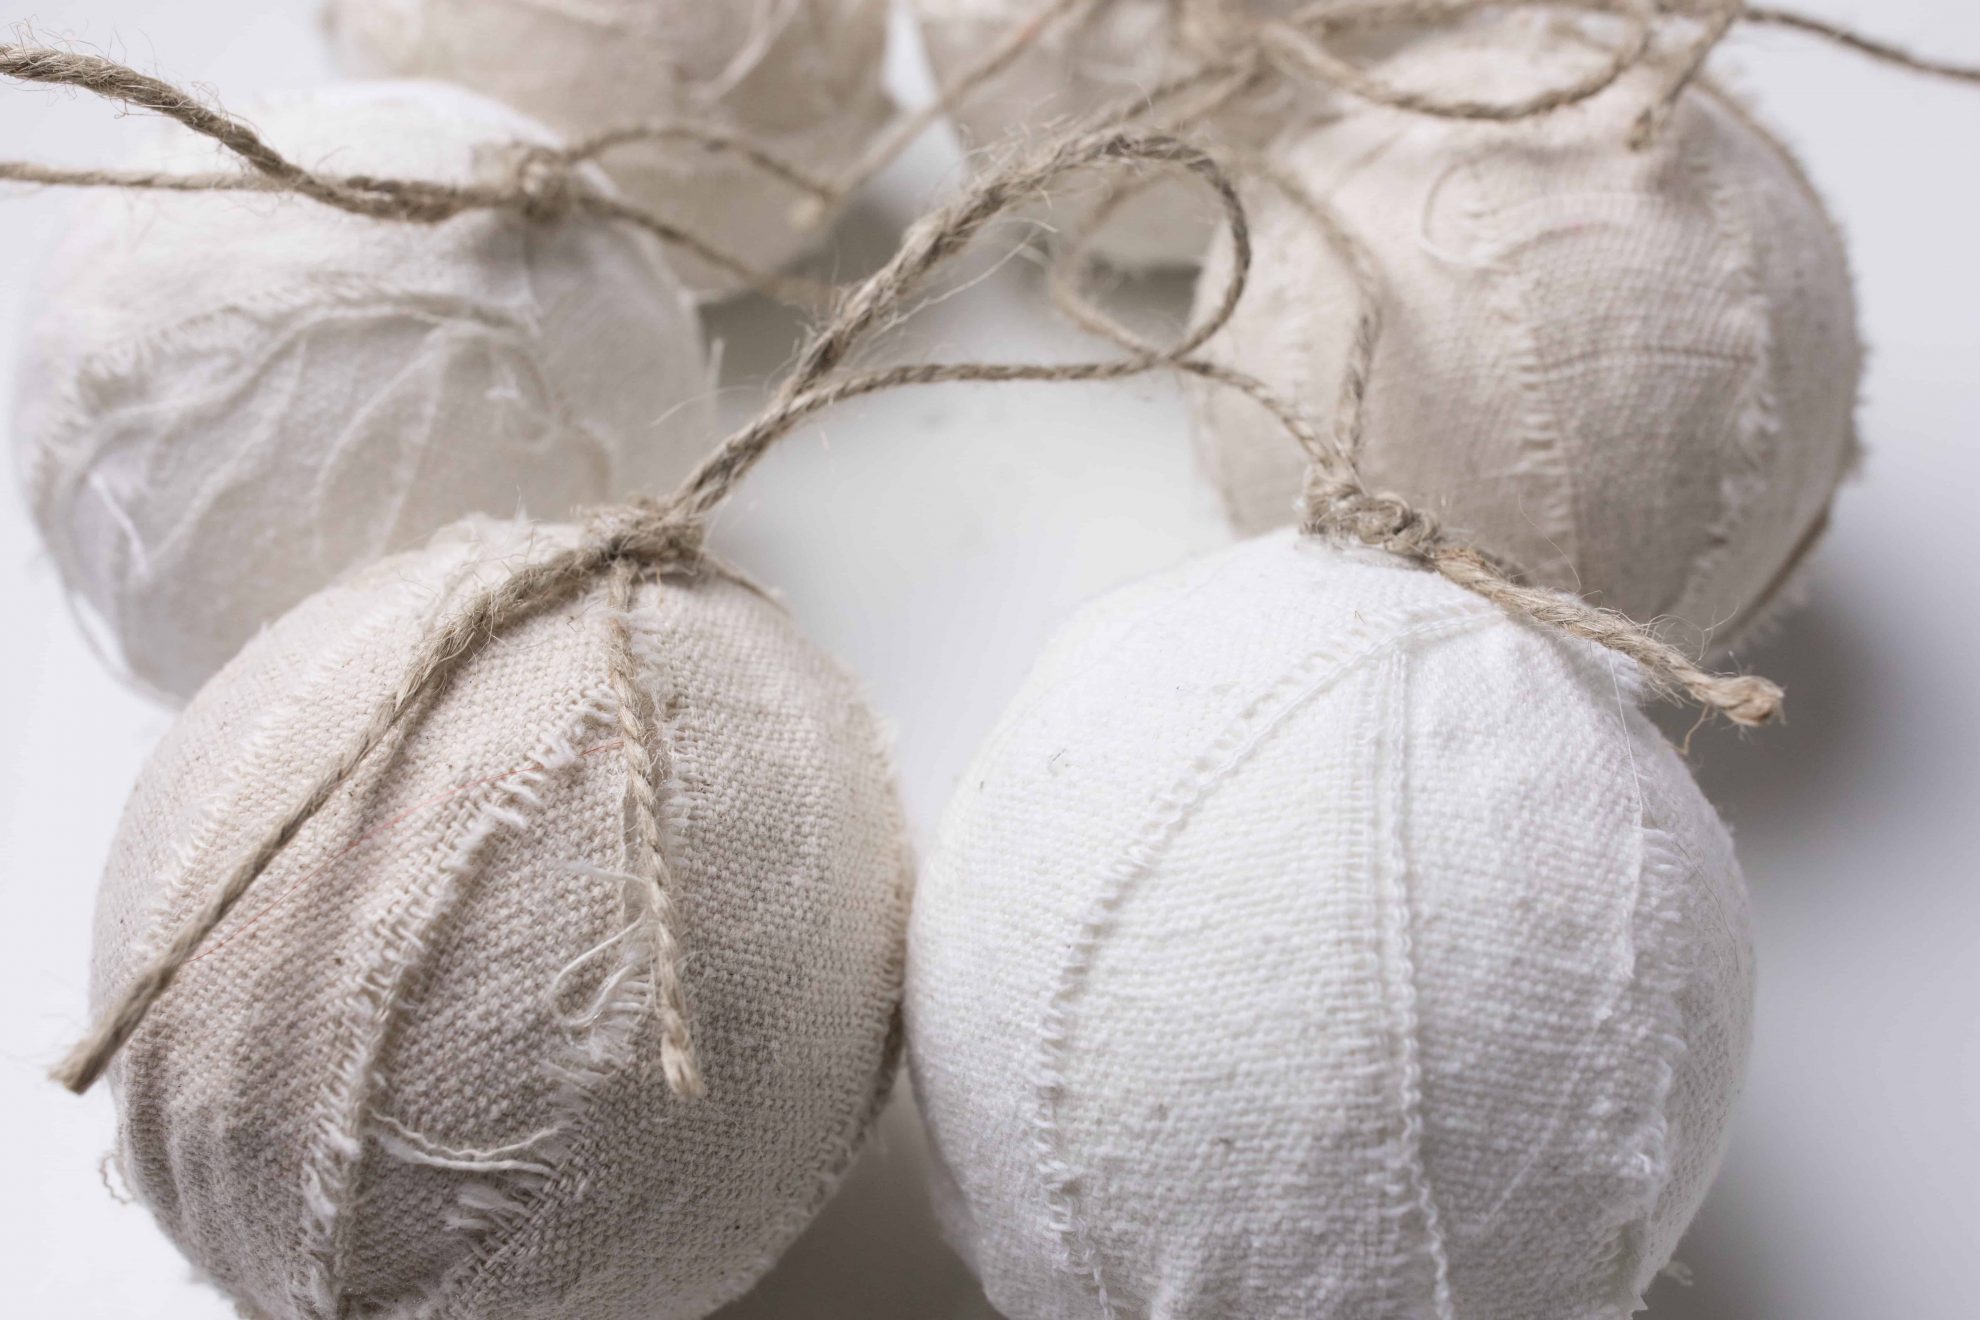 Homemade Christmas Ornaments made with drop cloth and styrofoam craft balls. Super simple tutorial includes video 